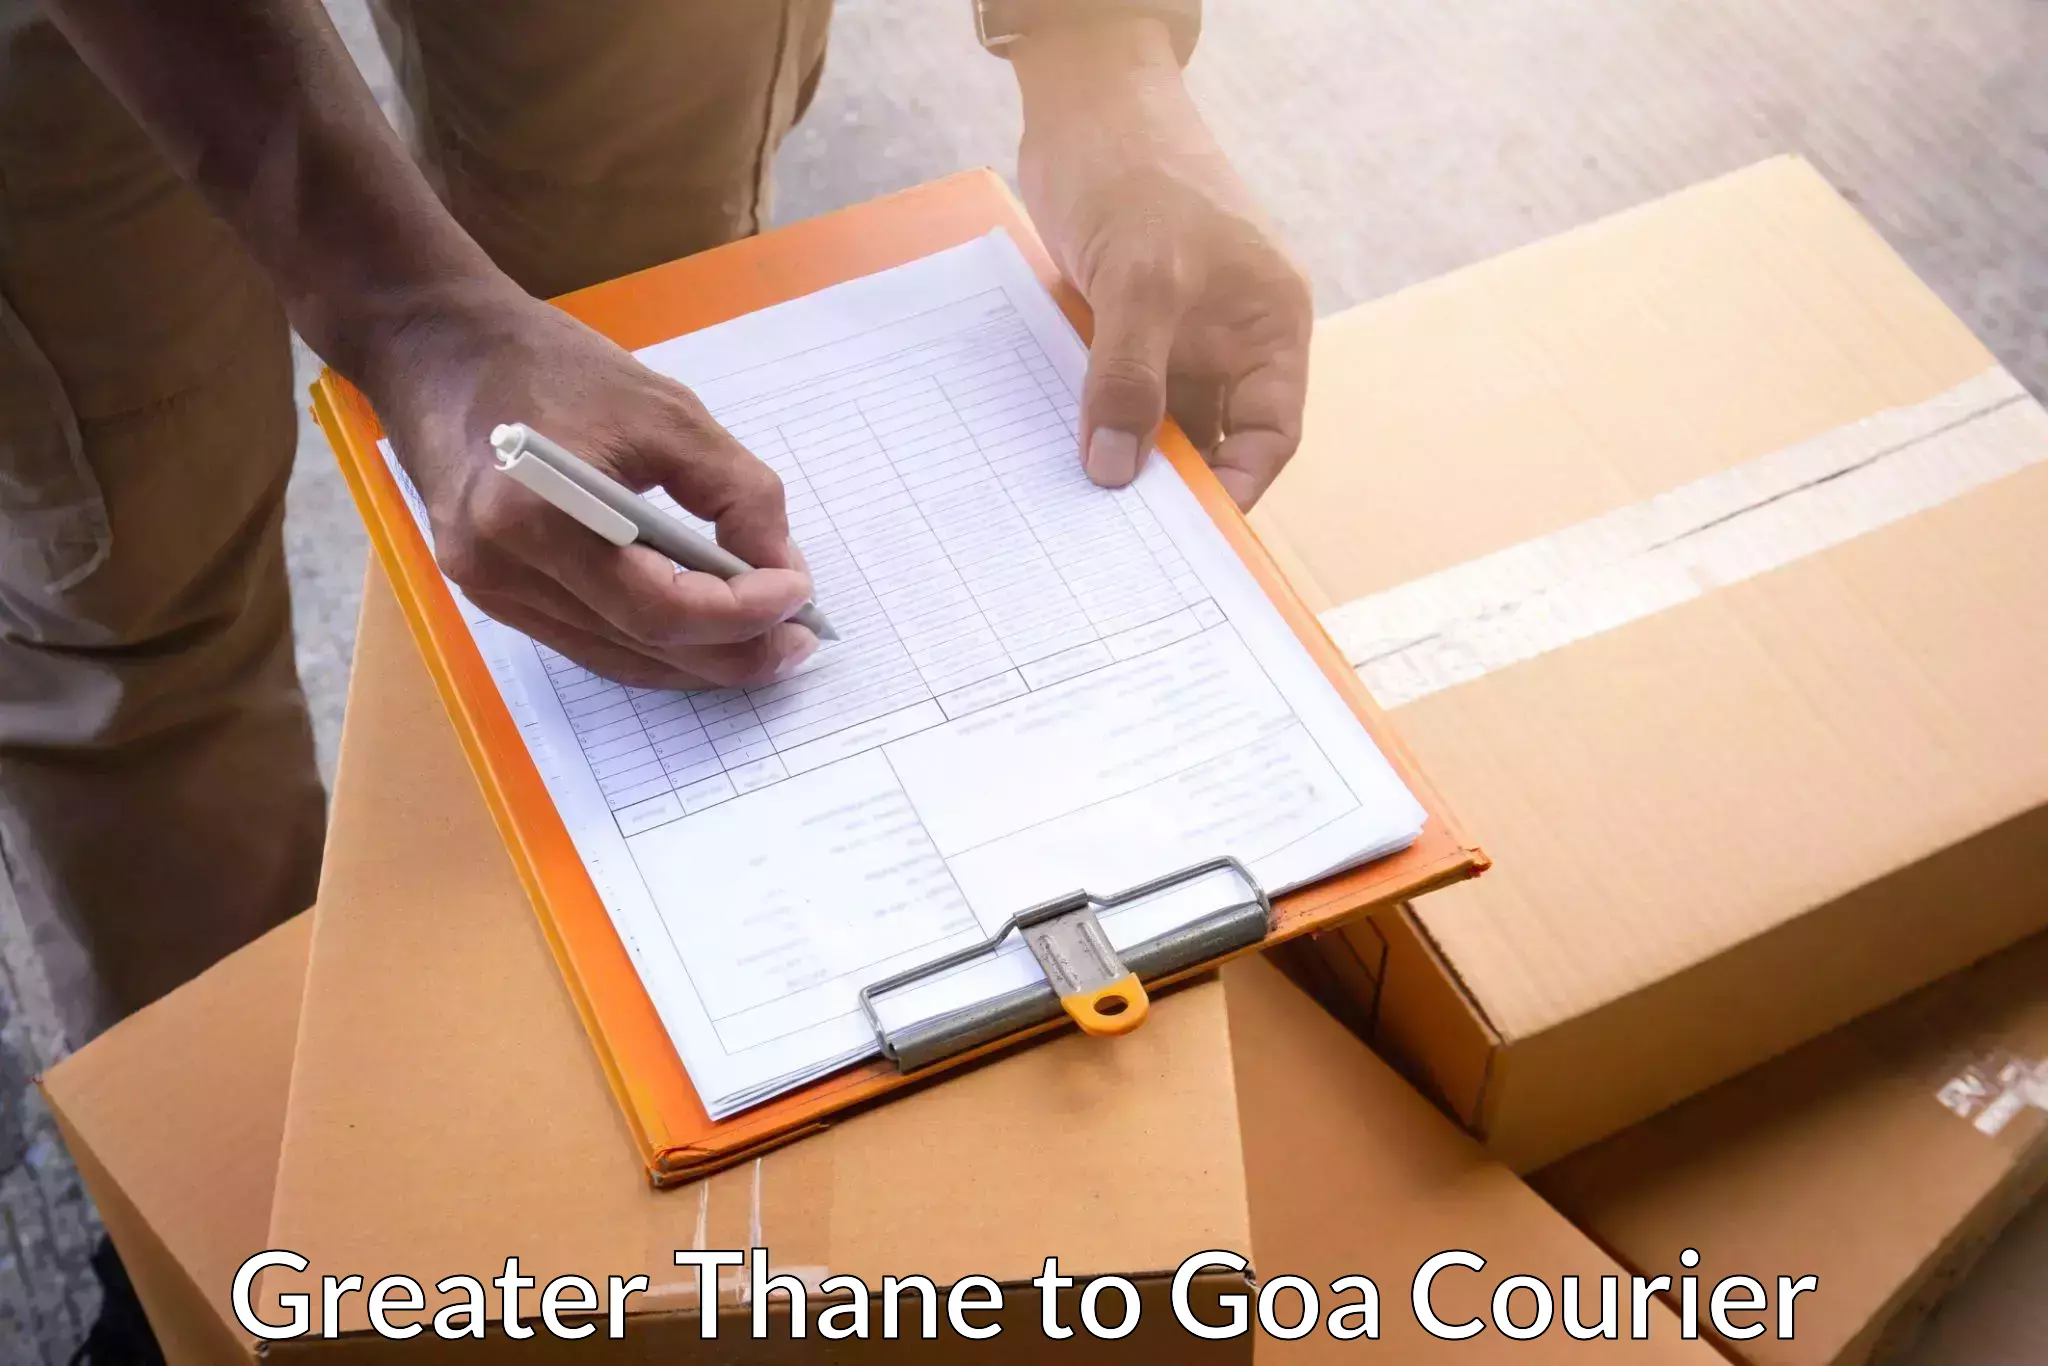 Tracking updates in Greater Thane to Goa